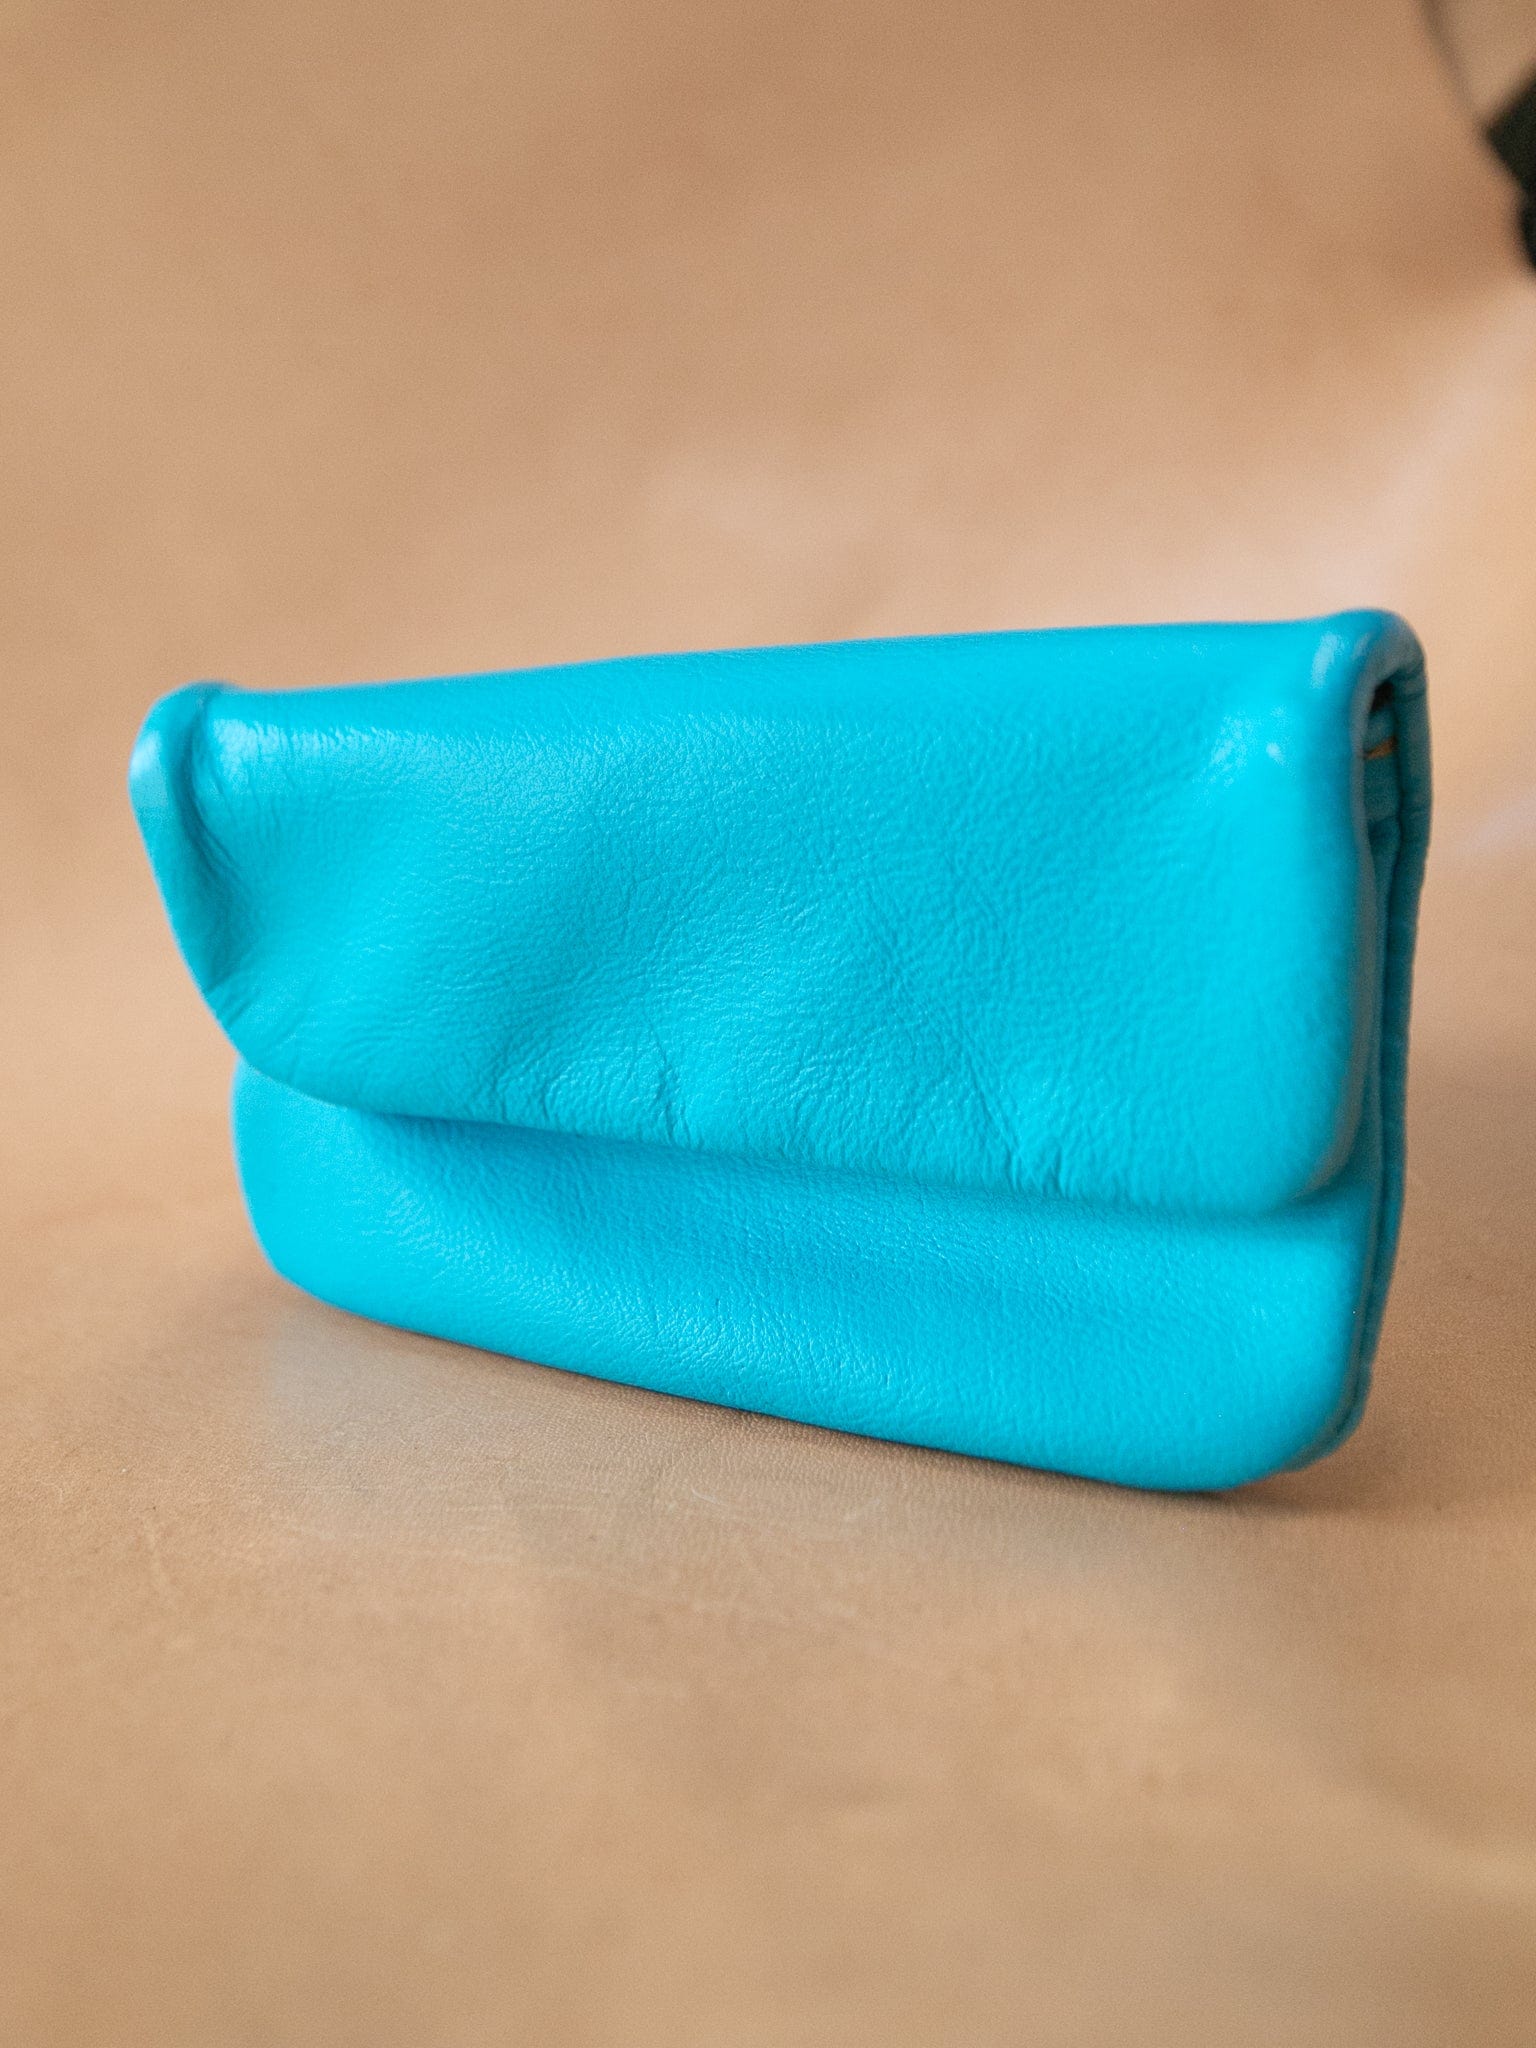 The Real McCaul Tobacco Pouches Baby Blue Tobacco Pouch - Neon - Kangaroo Australian Made Australian Owned Leather Tobacco Pouch Australian Made Kangaroo & Cowhide Leather